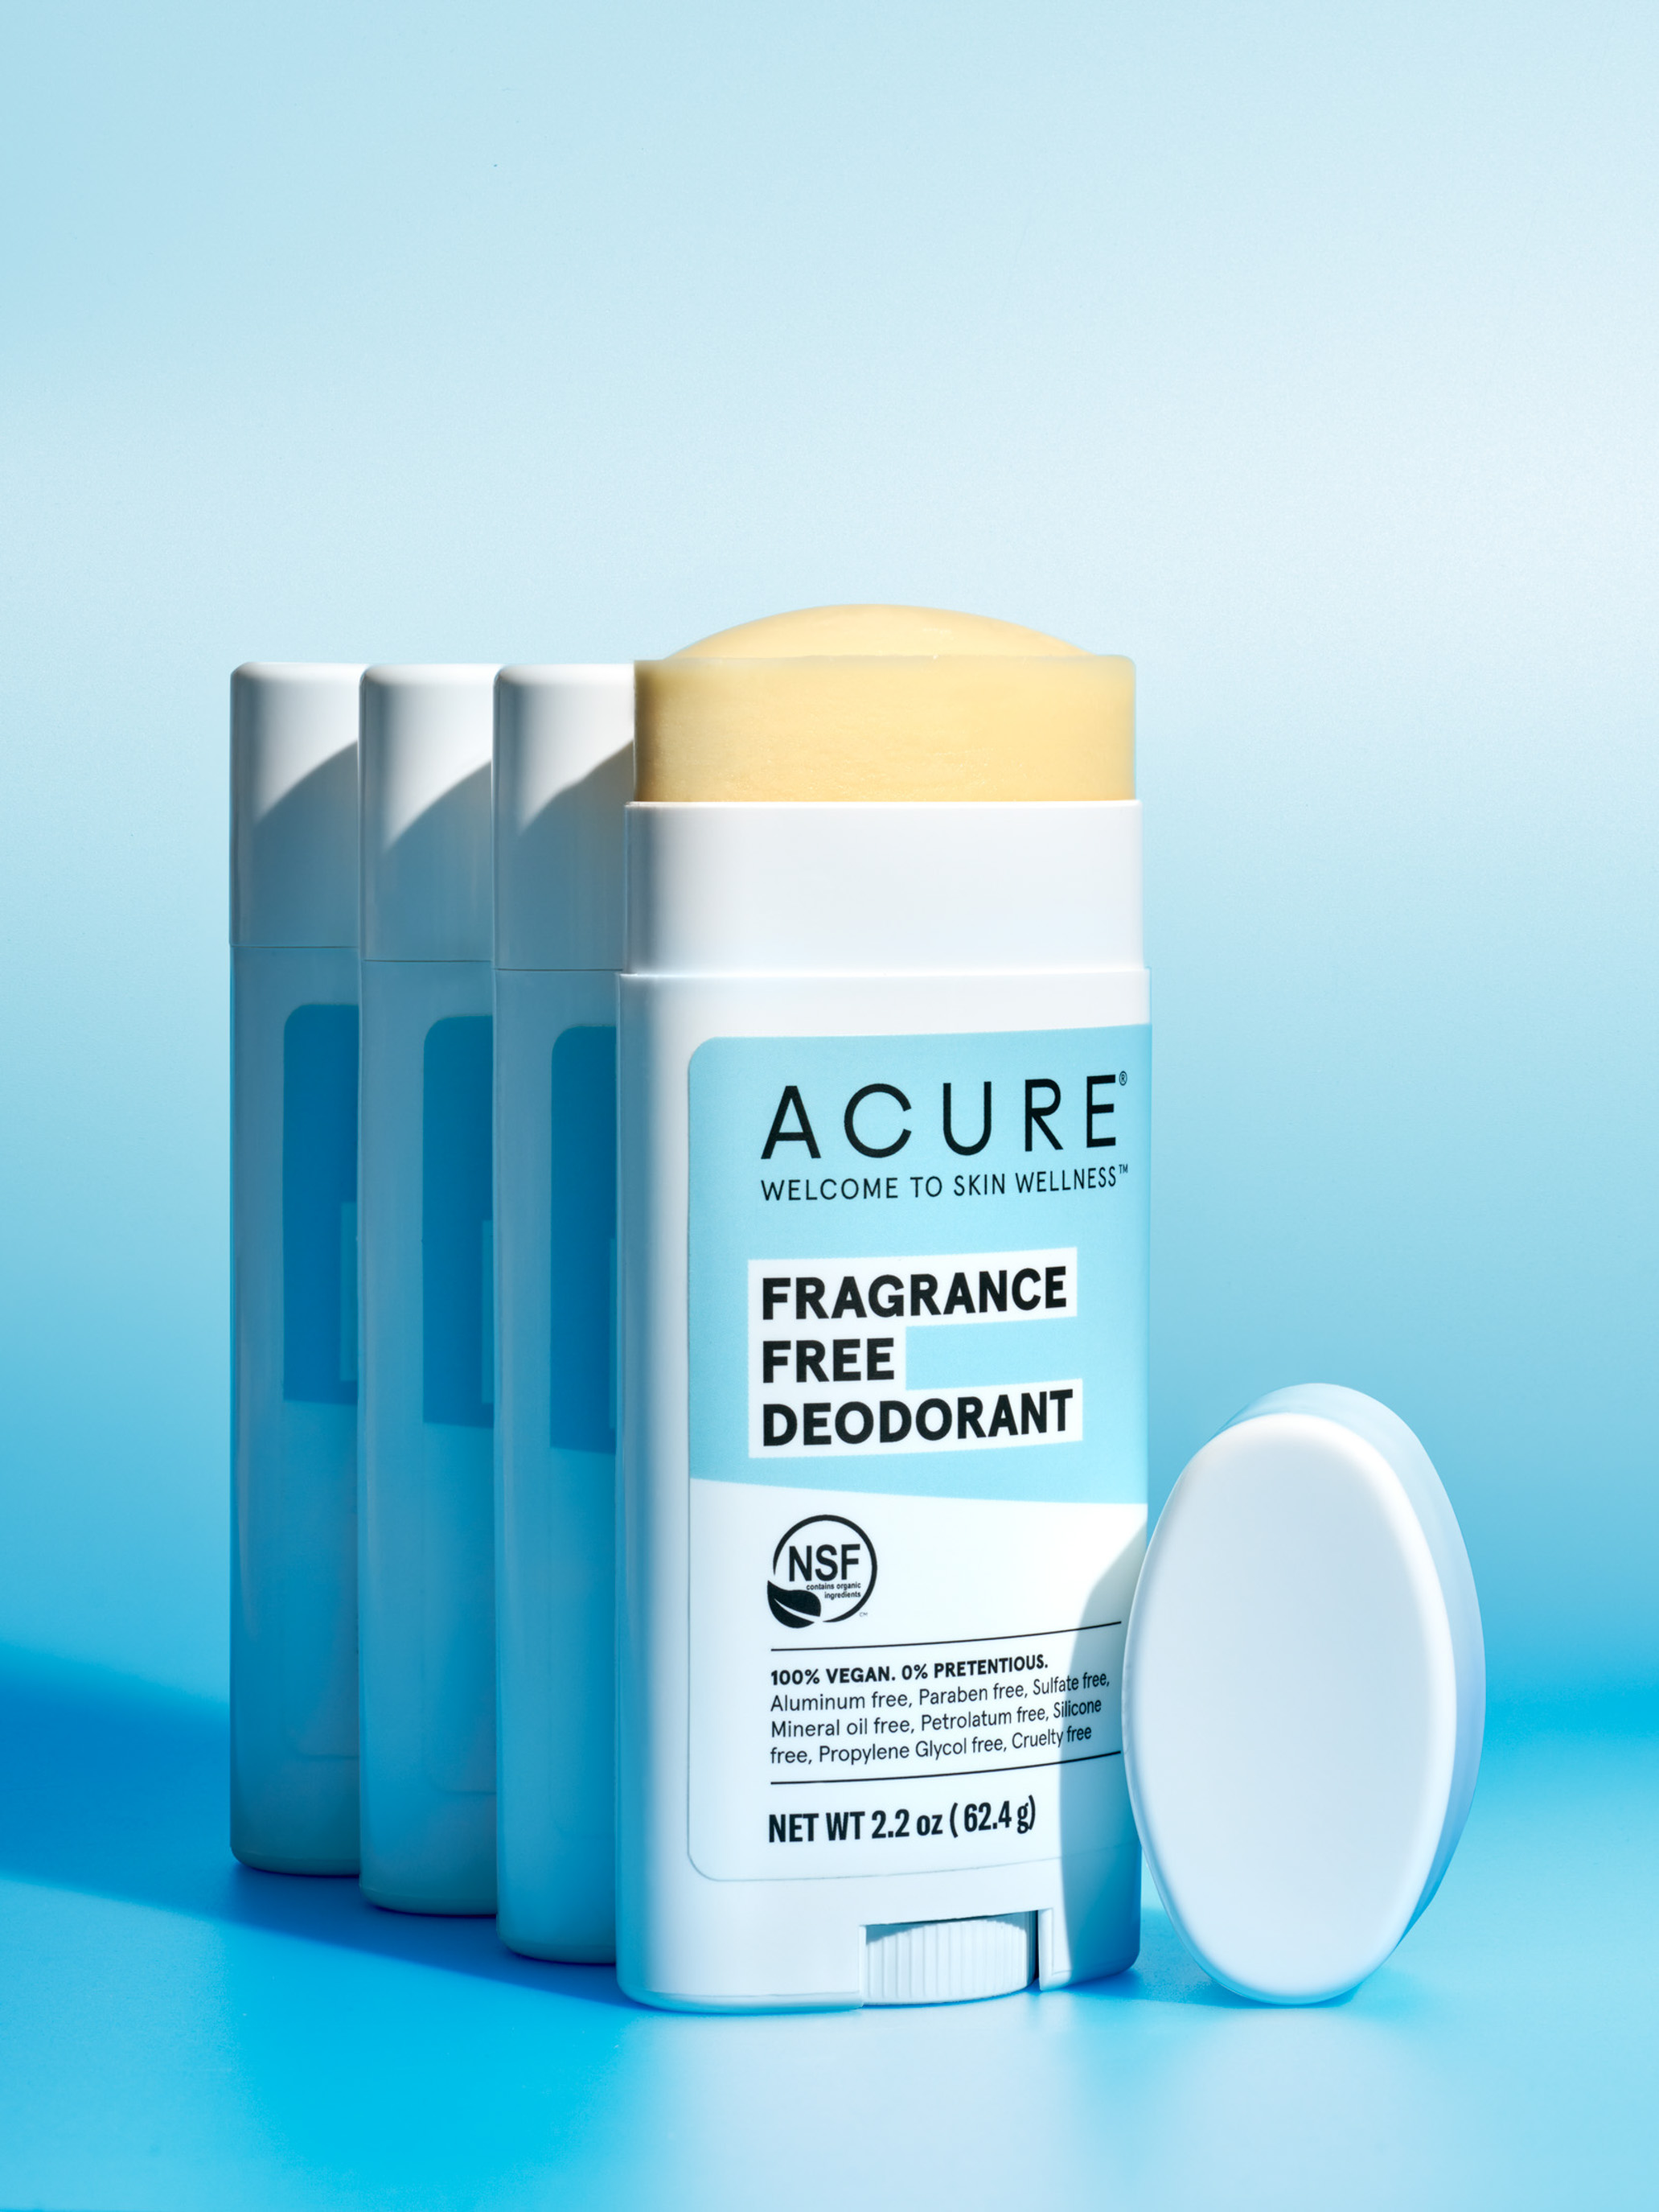 STAN Acure Product Still Life Fragrance Free Deodorant